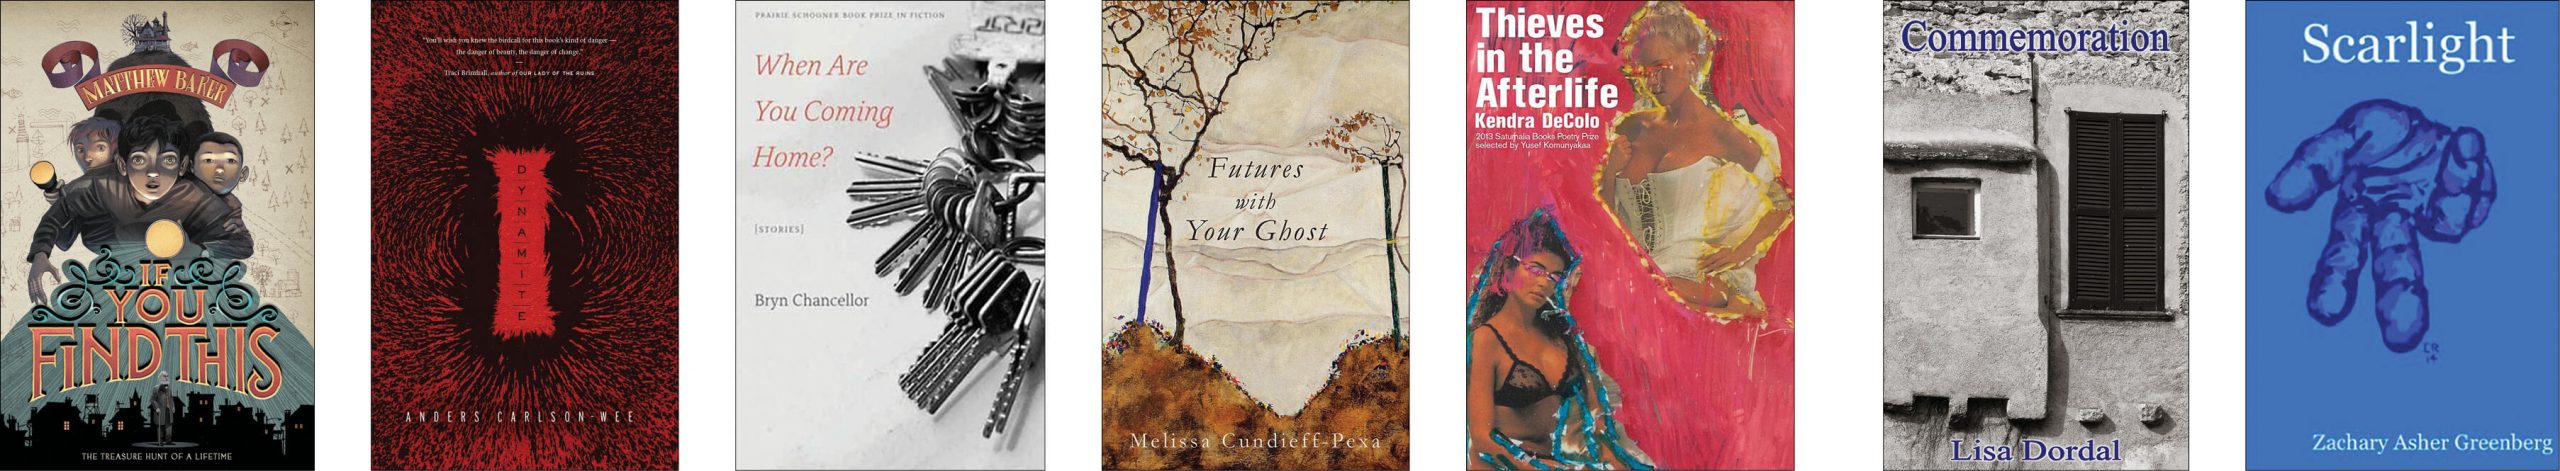 Some of the nation’s most prestigious honors and fellowships have already been awarded to graduates of Vanderbilt’s creative writing M.F.A. program, though the program is only nine years old. These are some of their published works.